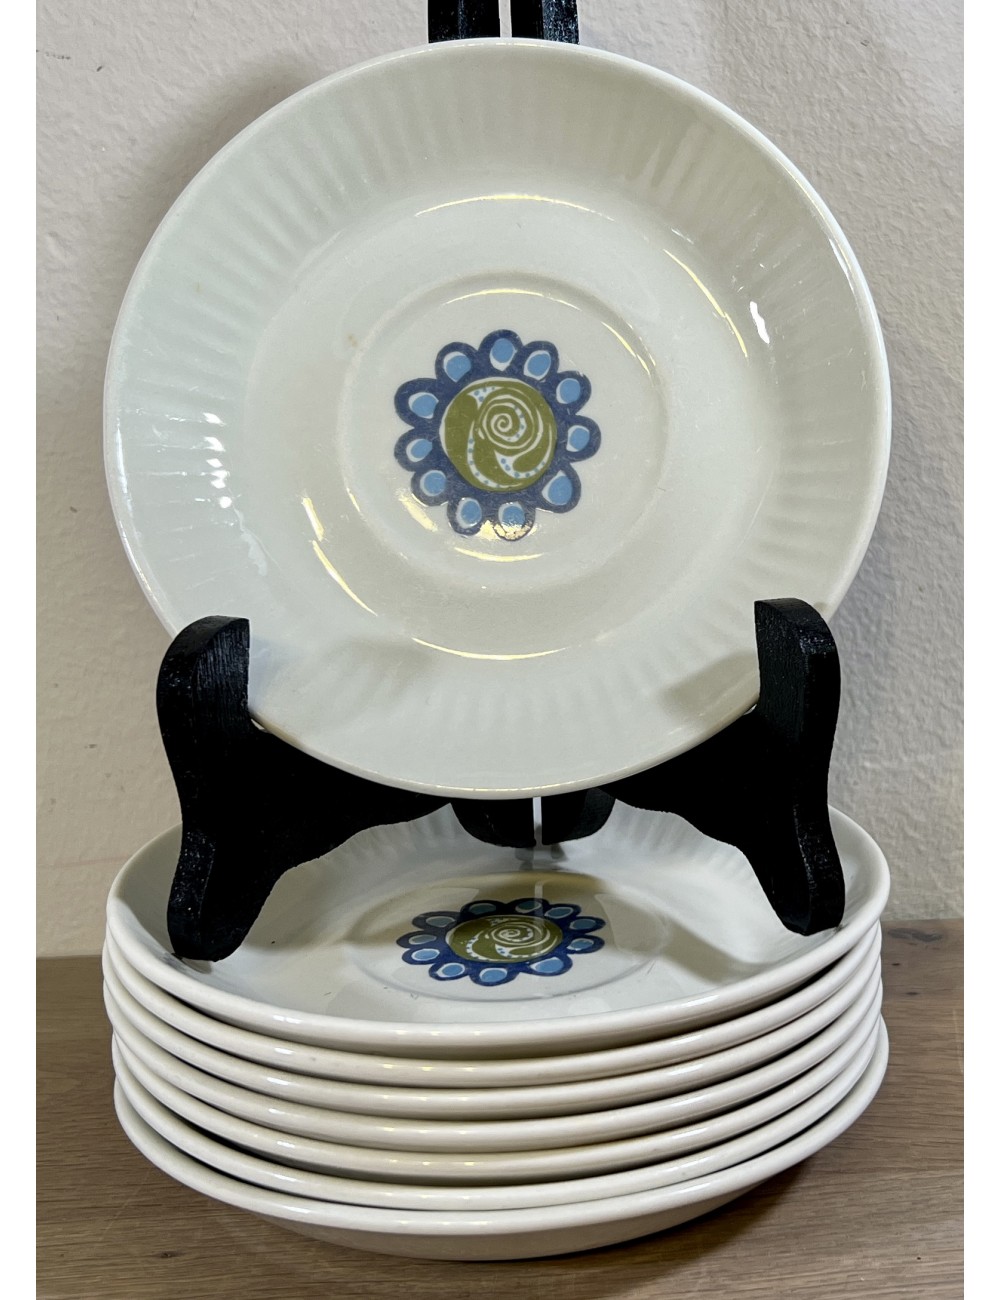 Saucer / Dish - Figgjo Flint (Norway) - décor with a green/blue flower